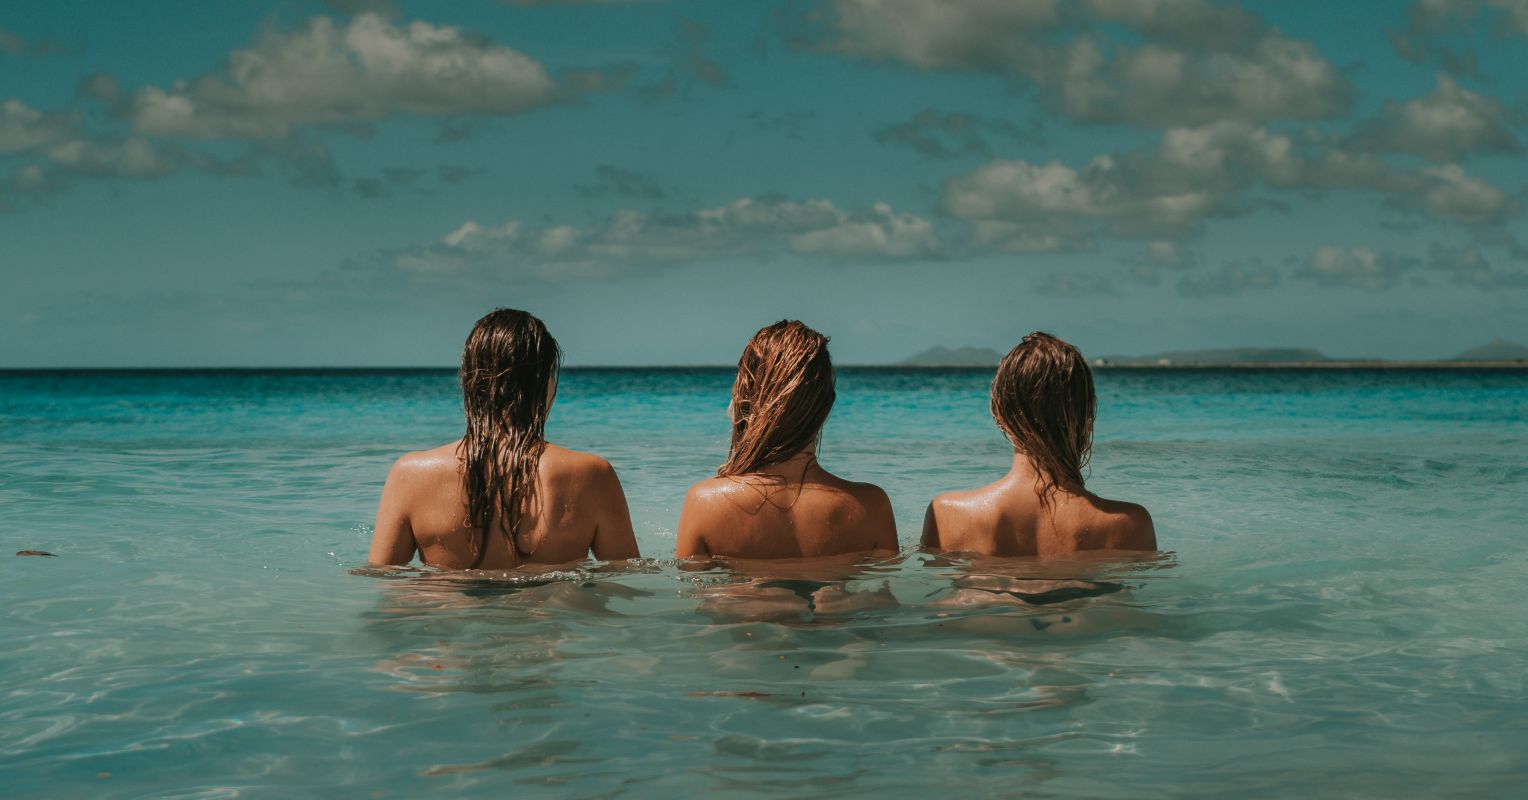 Spending Time Naked With Strangers Can Improve Body Image Psychology Today